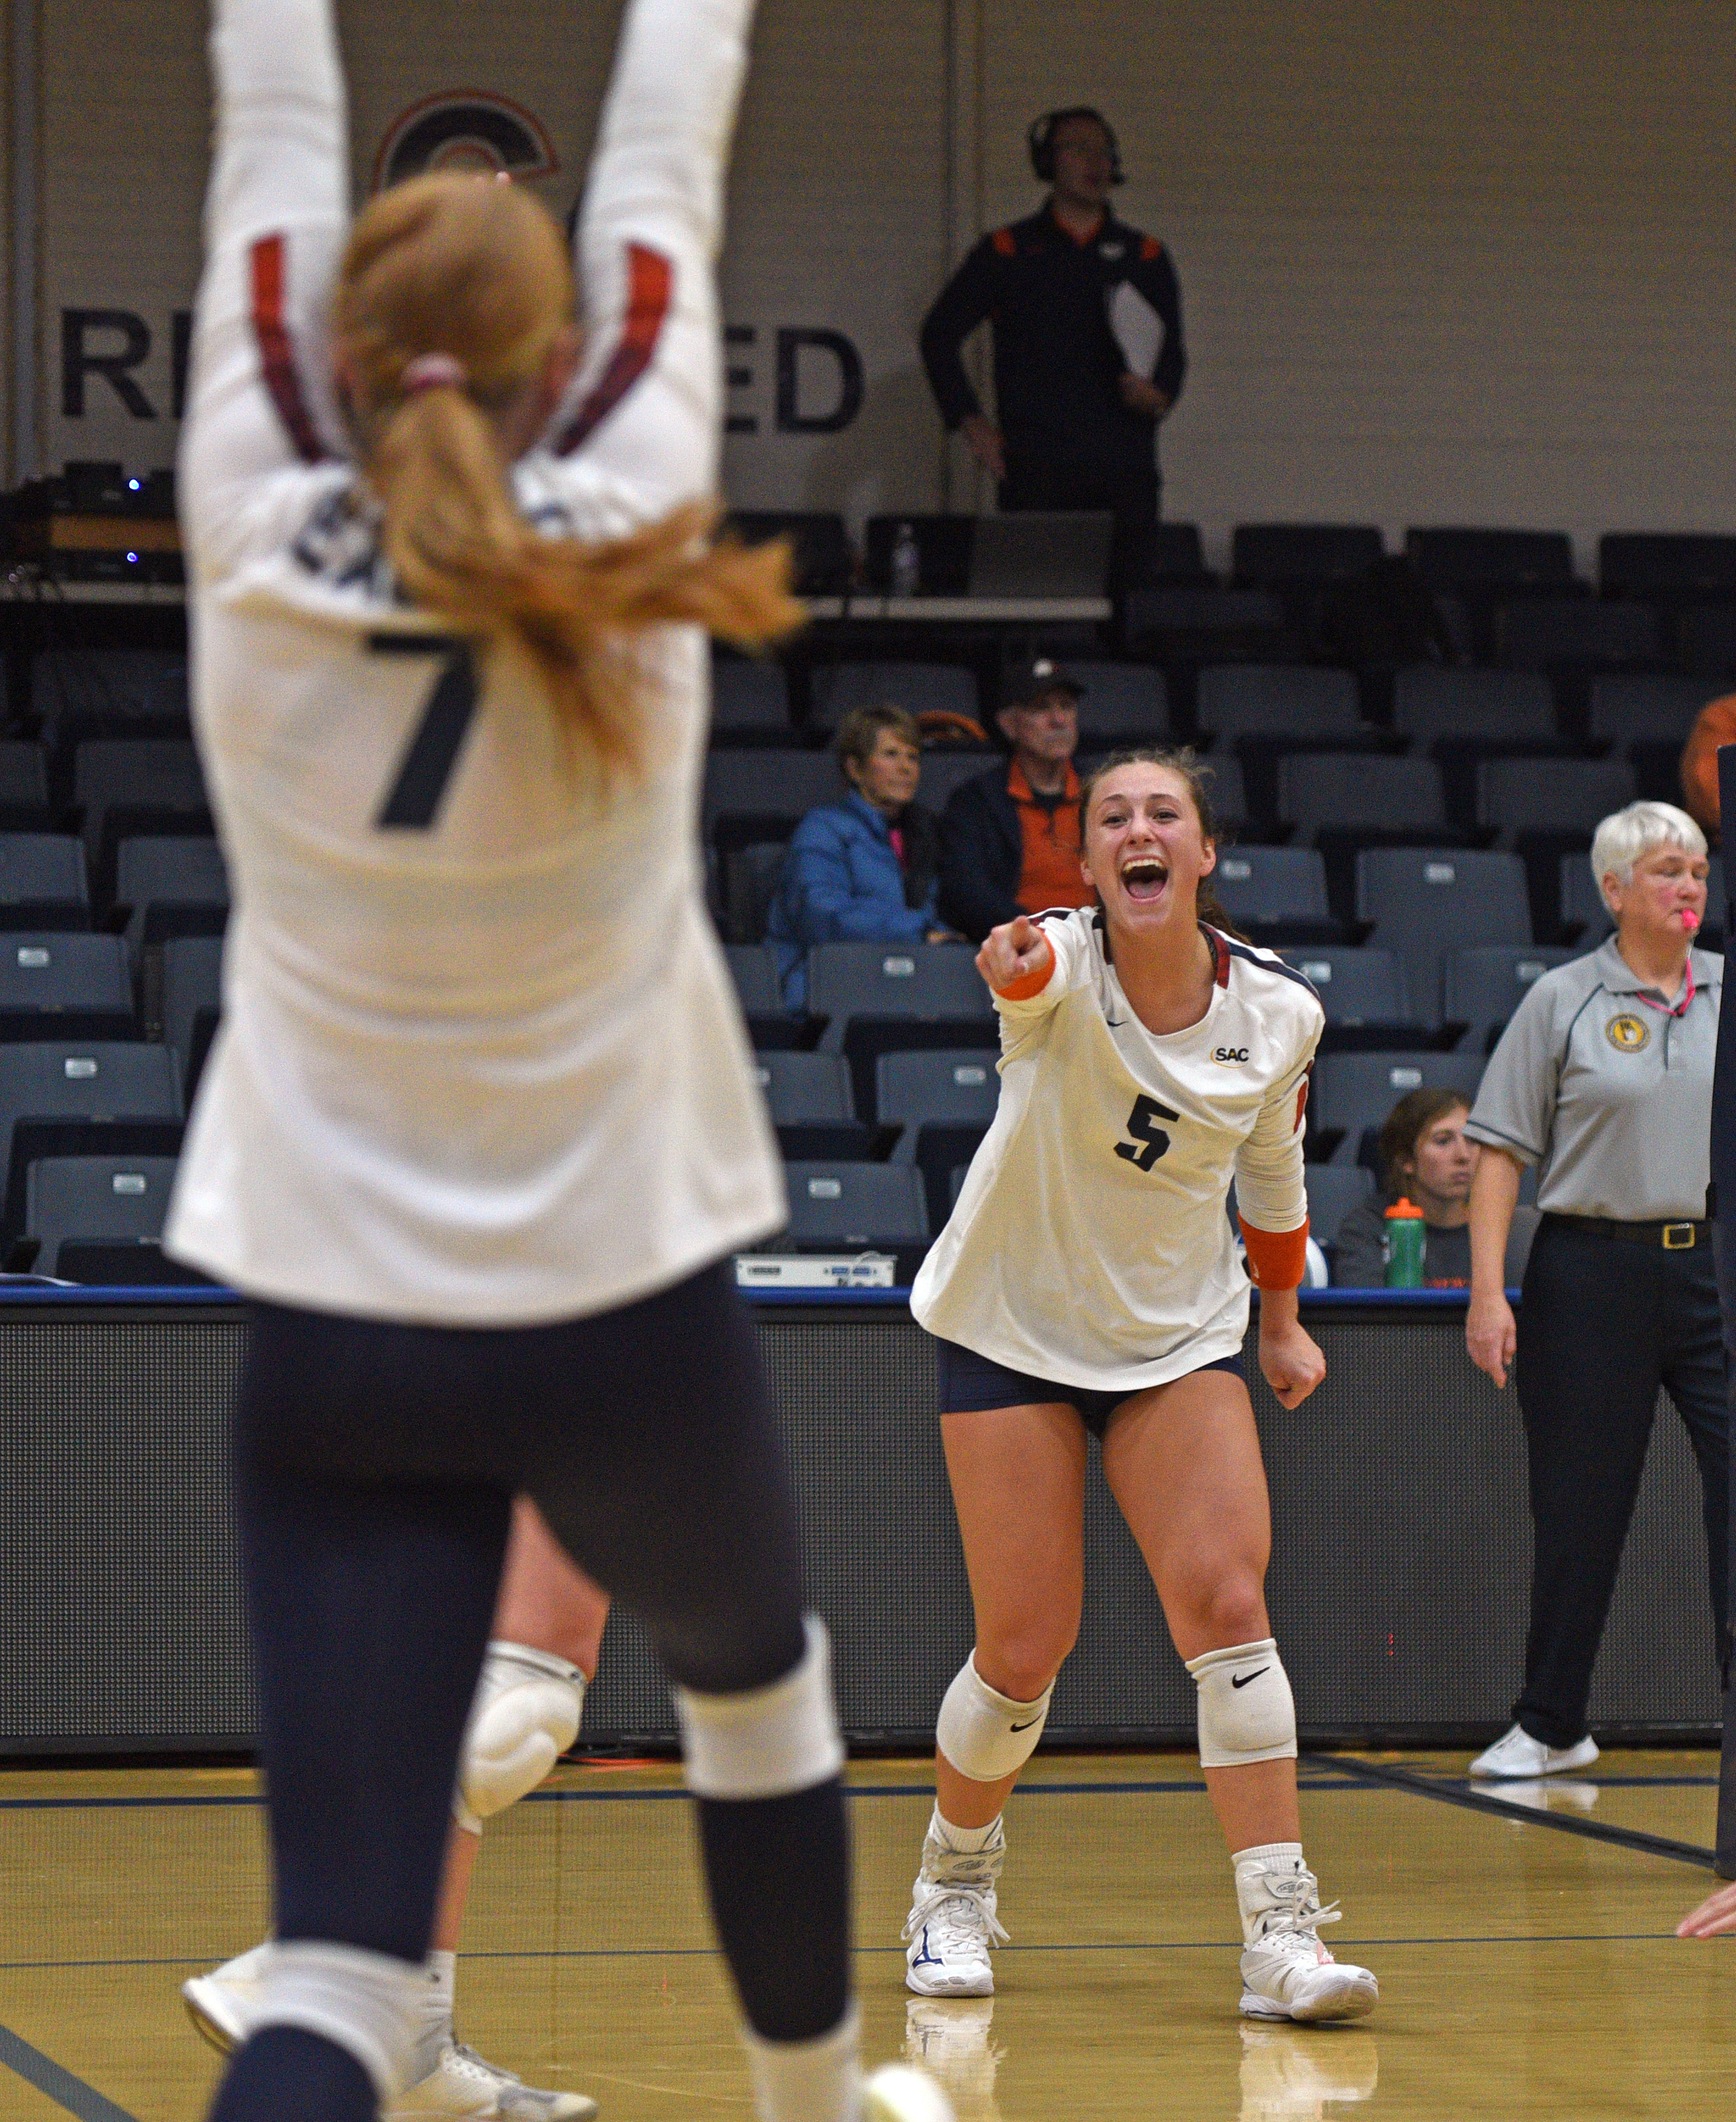 Eagles sweep Wolves, advance to SAC semifinals